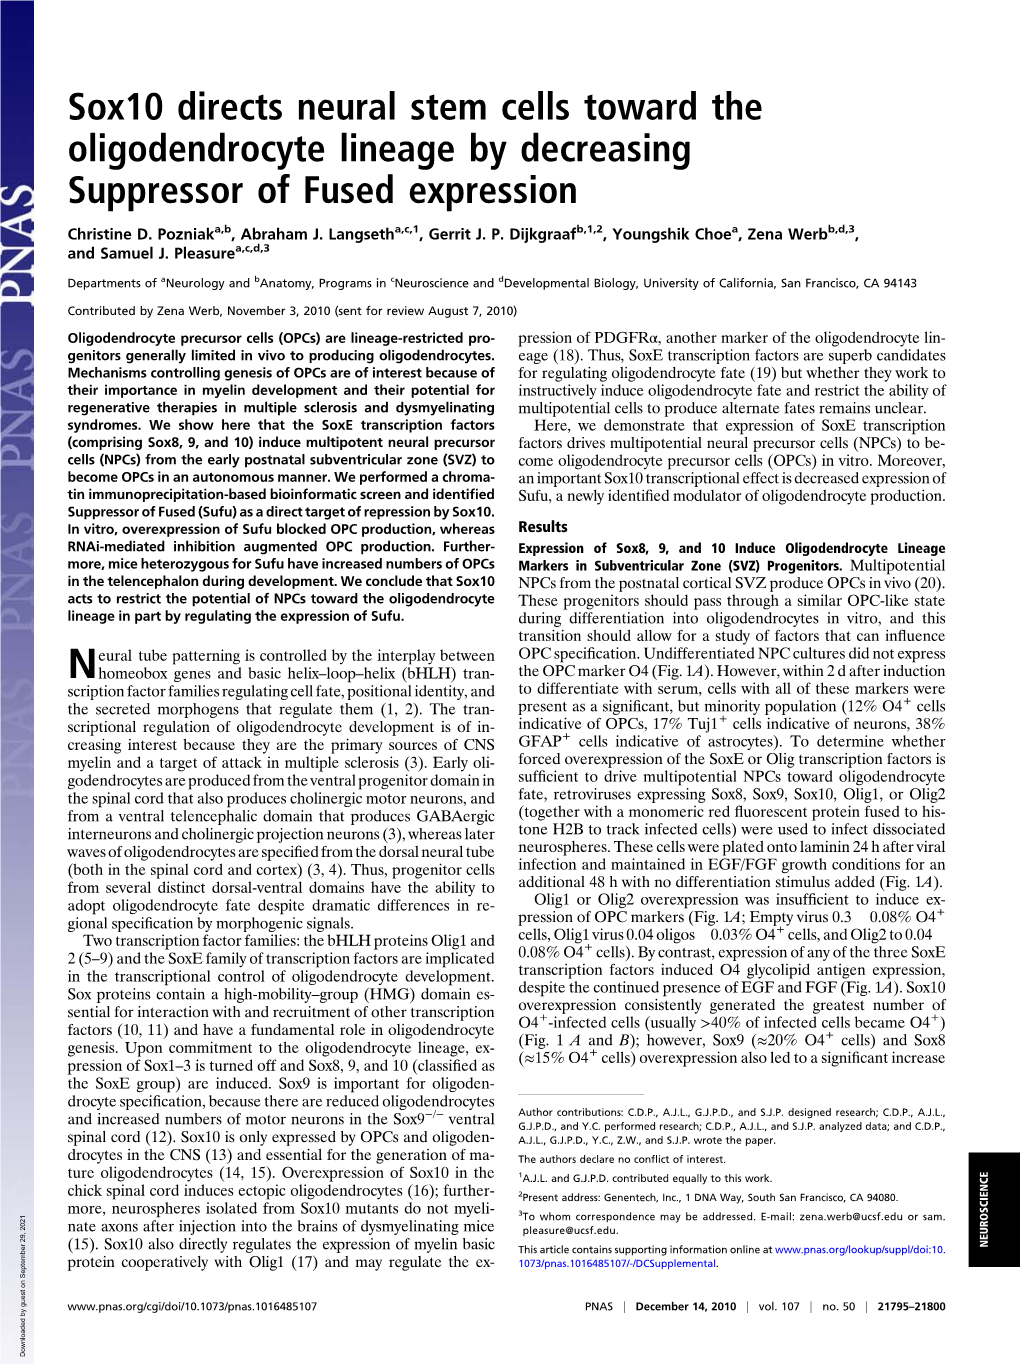 Sox10 Directs Neural Stem Cells Toward the Oligodendrocyte Lineage by Decreasing Suppressor of Fused Expression